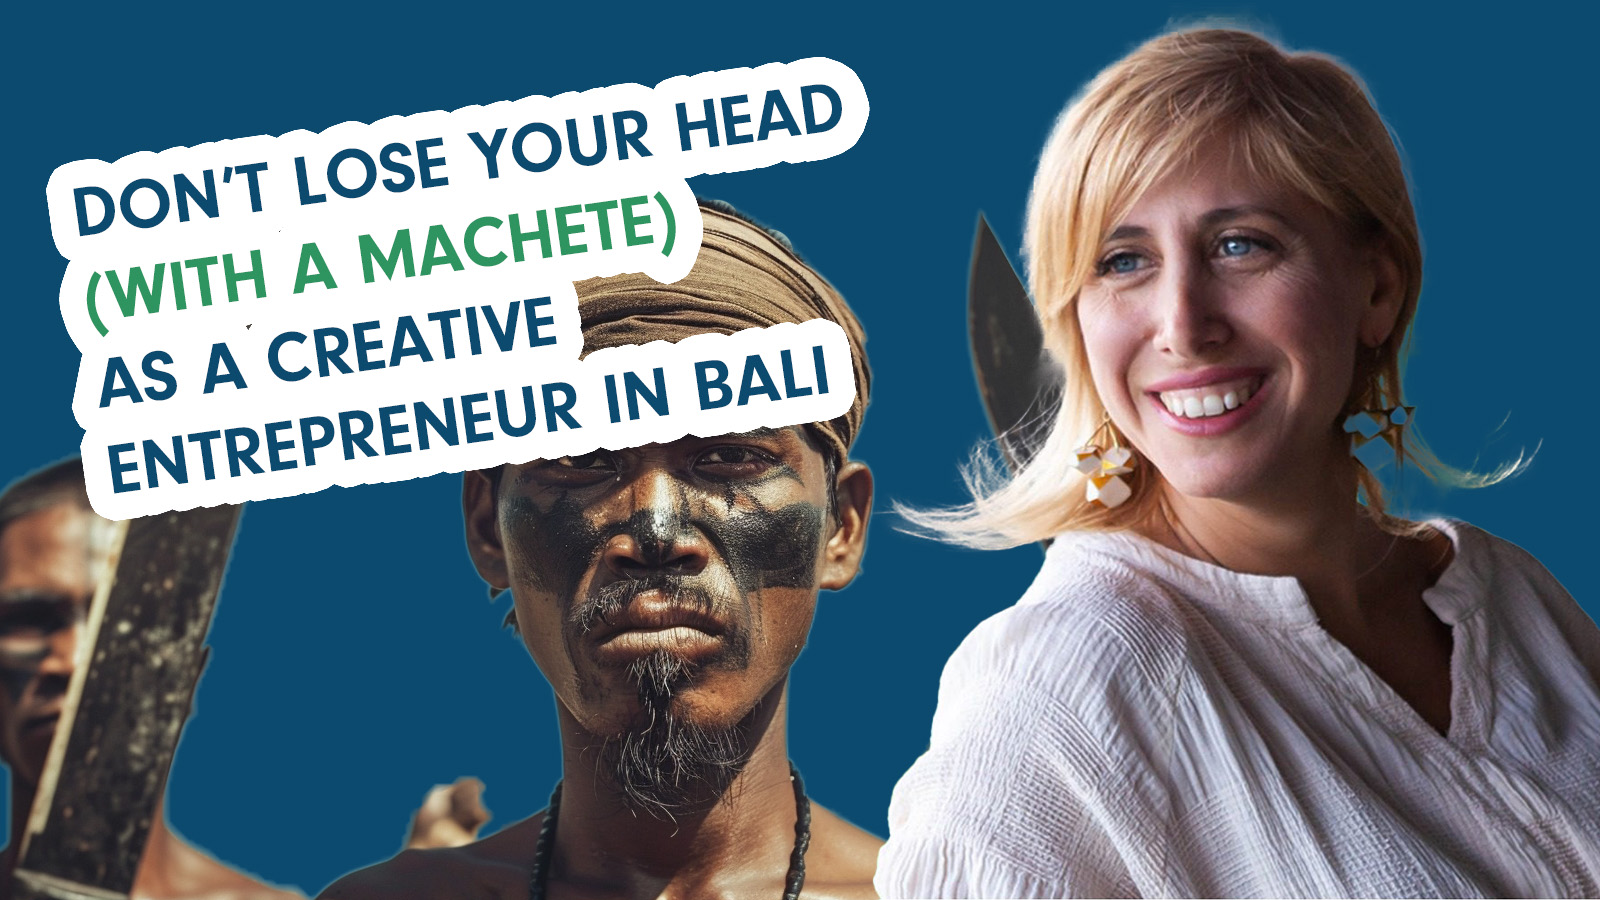 The Emerge Podcast: Sheila Man On How Not To Lose Your Head (With a Machete) As A Creative Entrepreneur in Bali